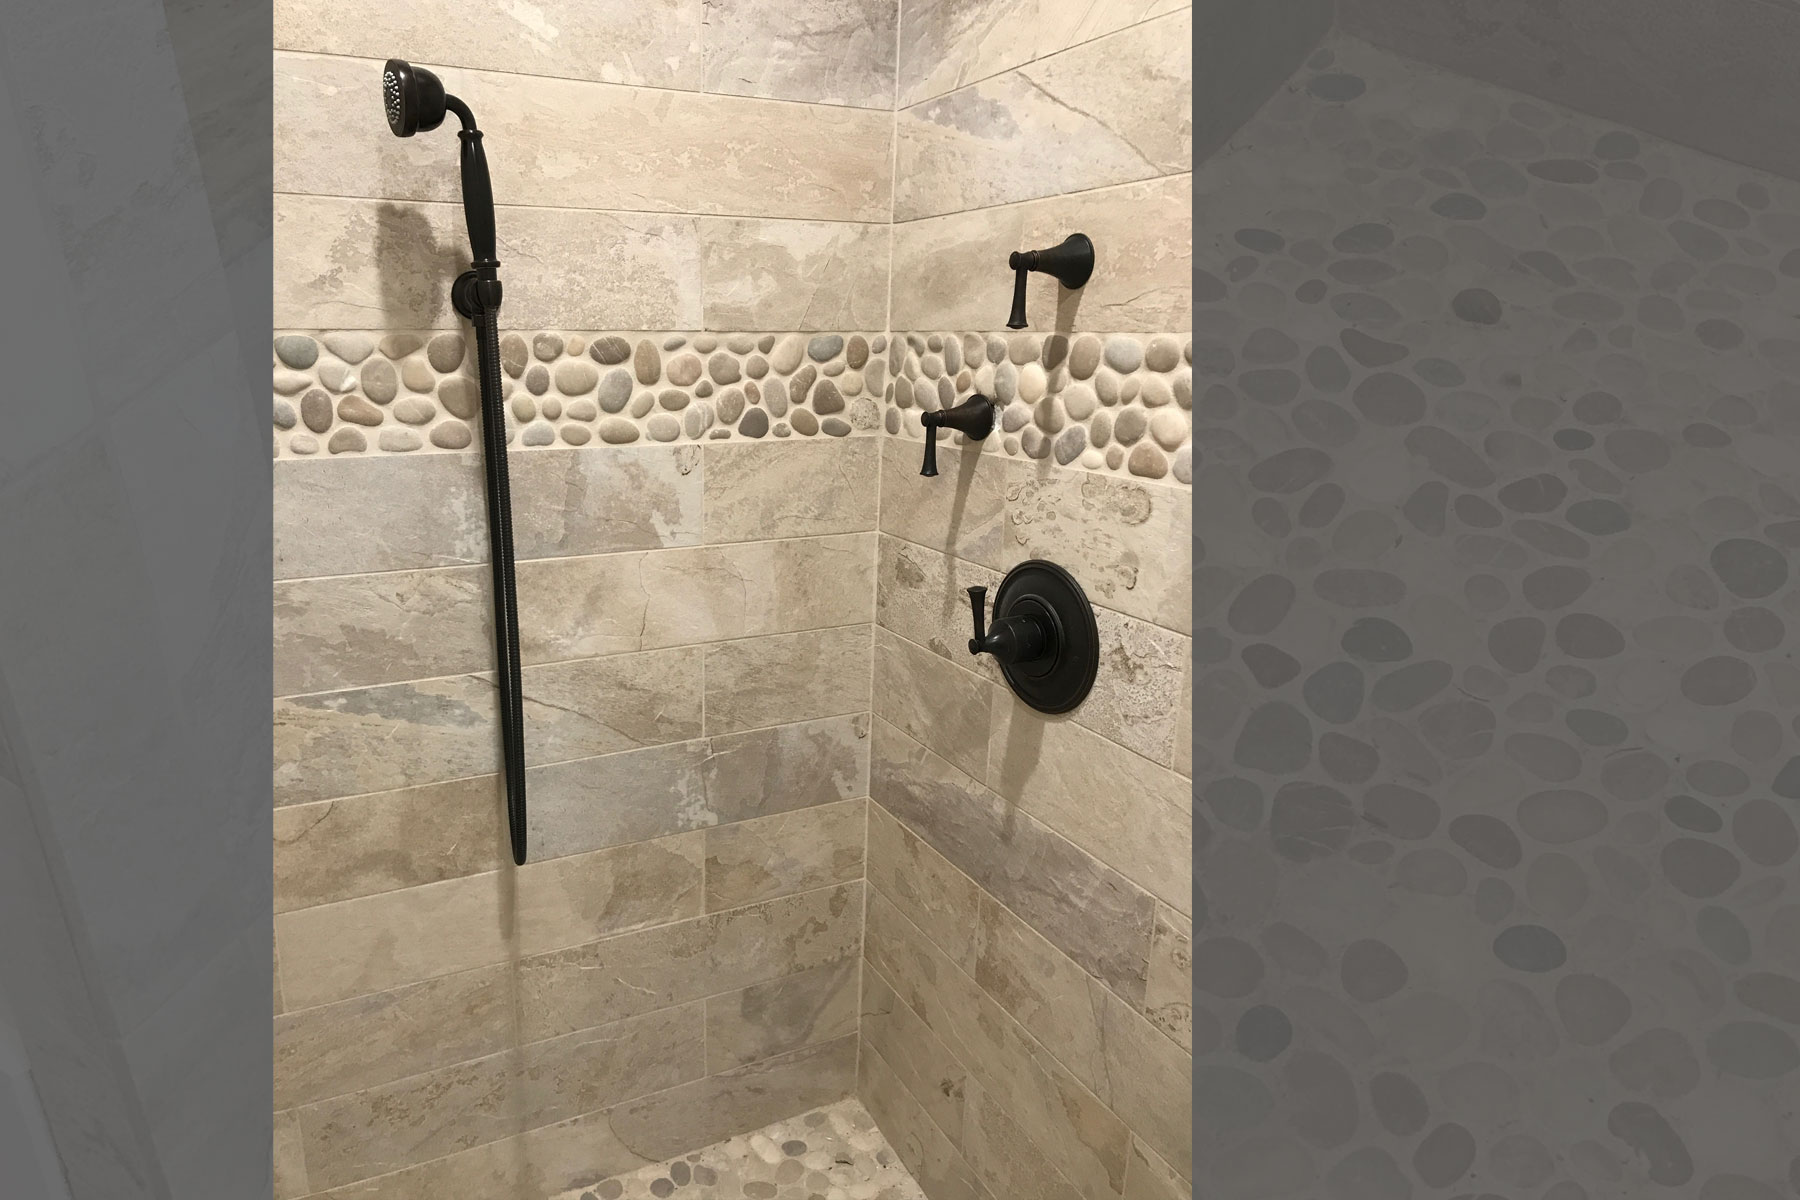 Bathroom renovation with river rock detail in wall tile